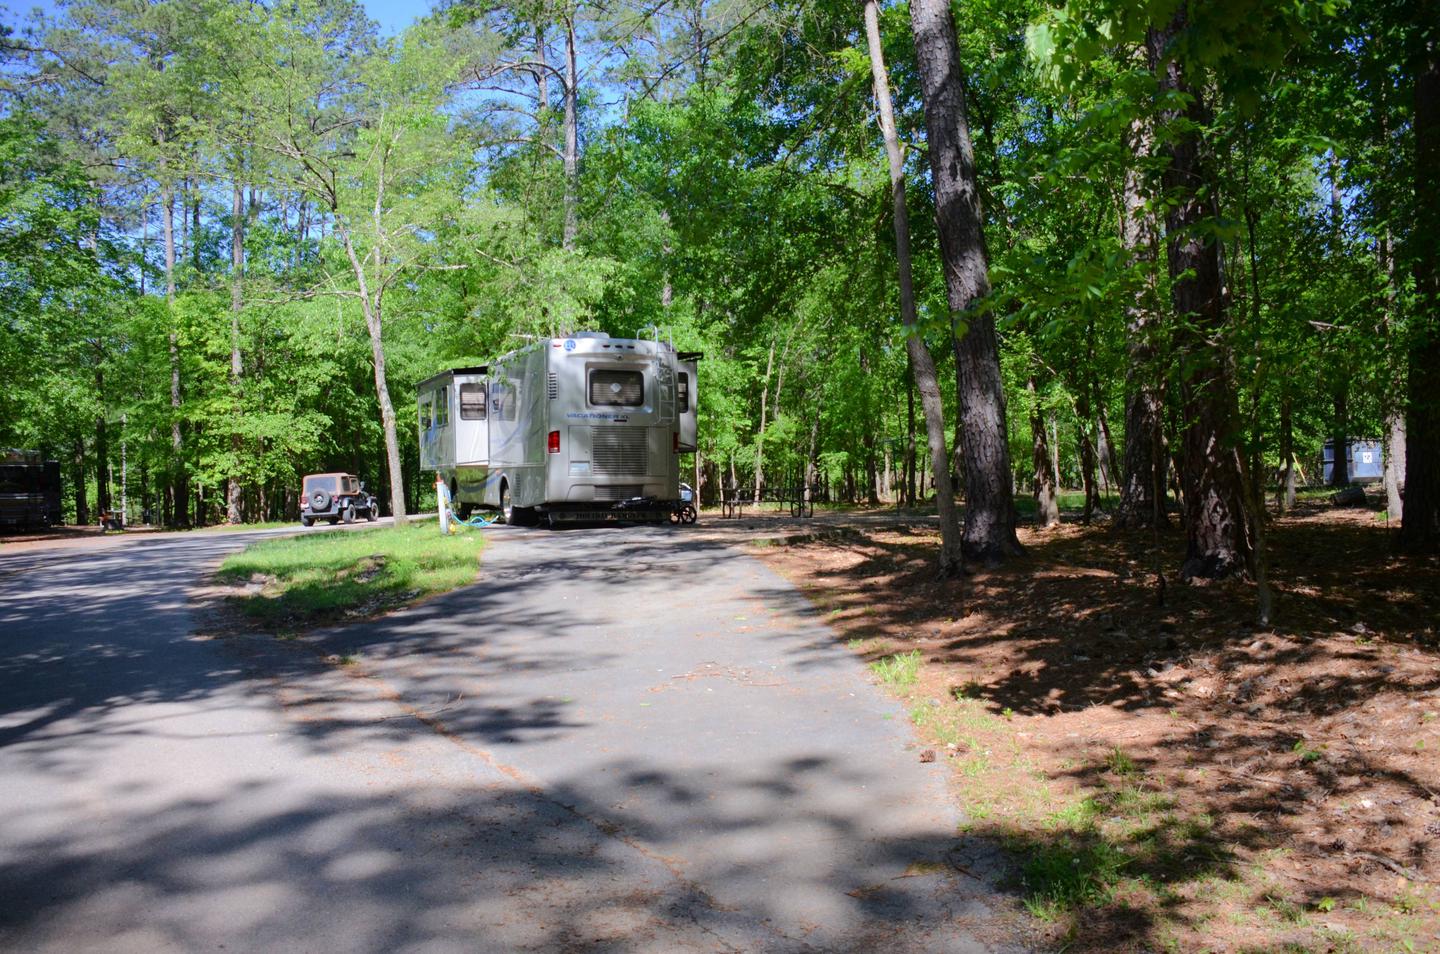 Pull-thru entrance, driveway slope, utilities-side clearance.McKinney Campground, campsite 74.